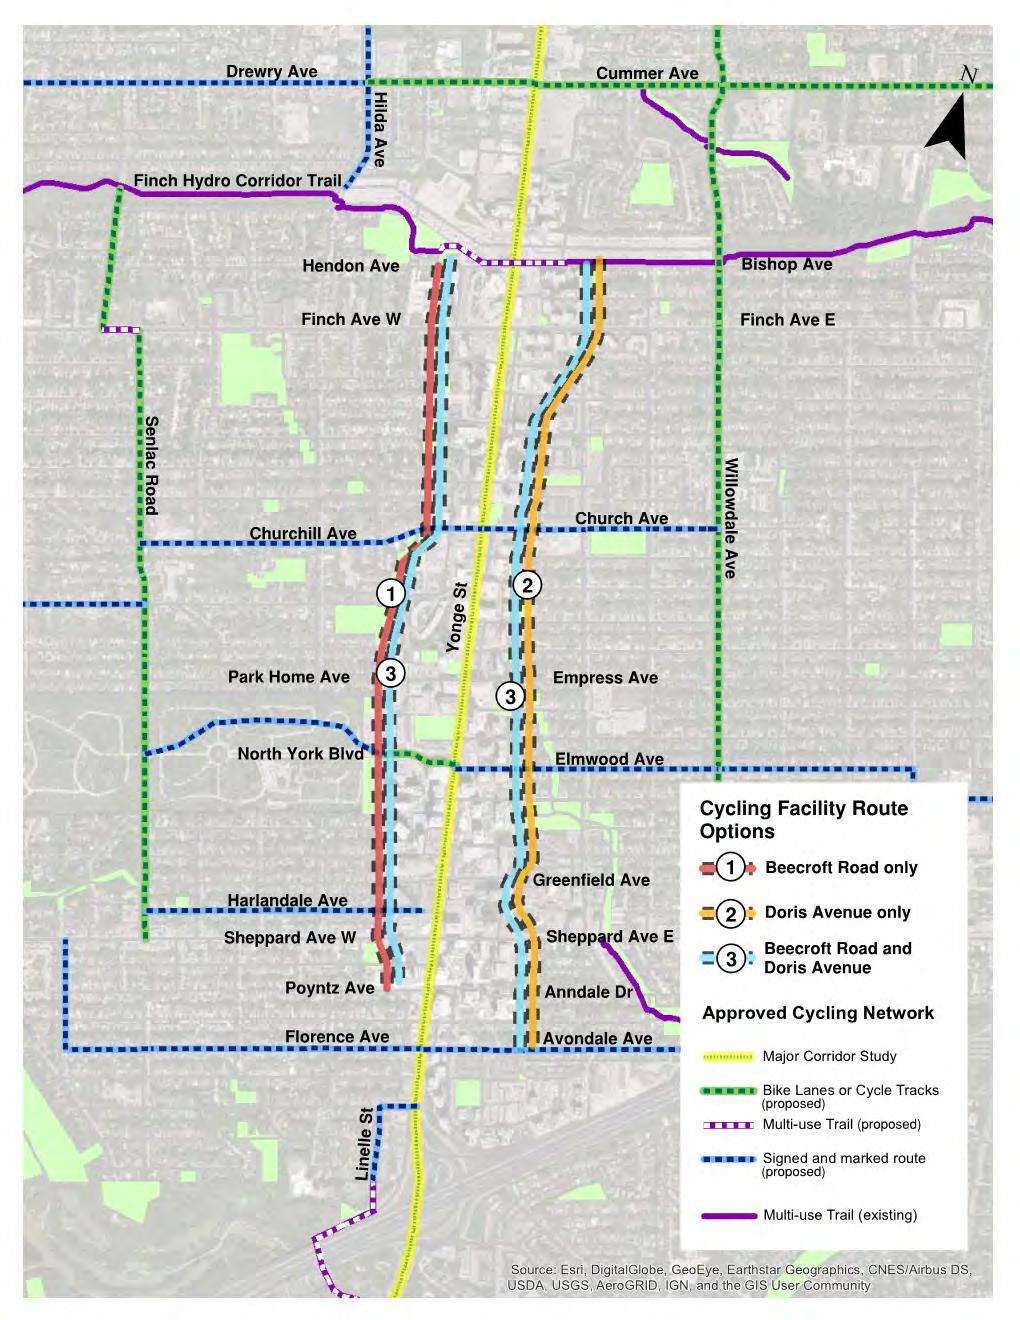 CYCLING NEWORK ALTERNATIVE The City s Public Works and Infrastructure Committee asked us to assess options on Beecroft Road and/or Doris Avenue instead of on Yonge treet.